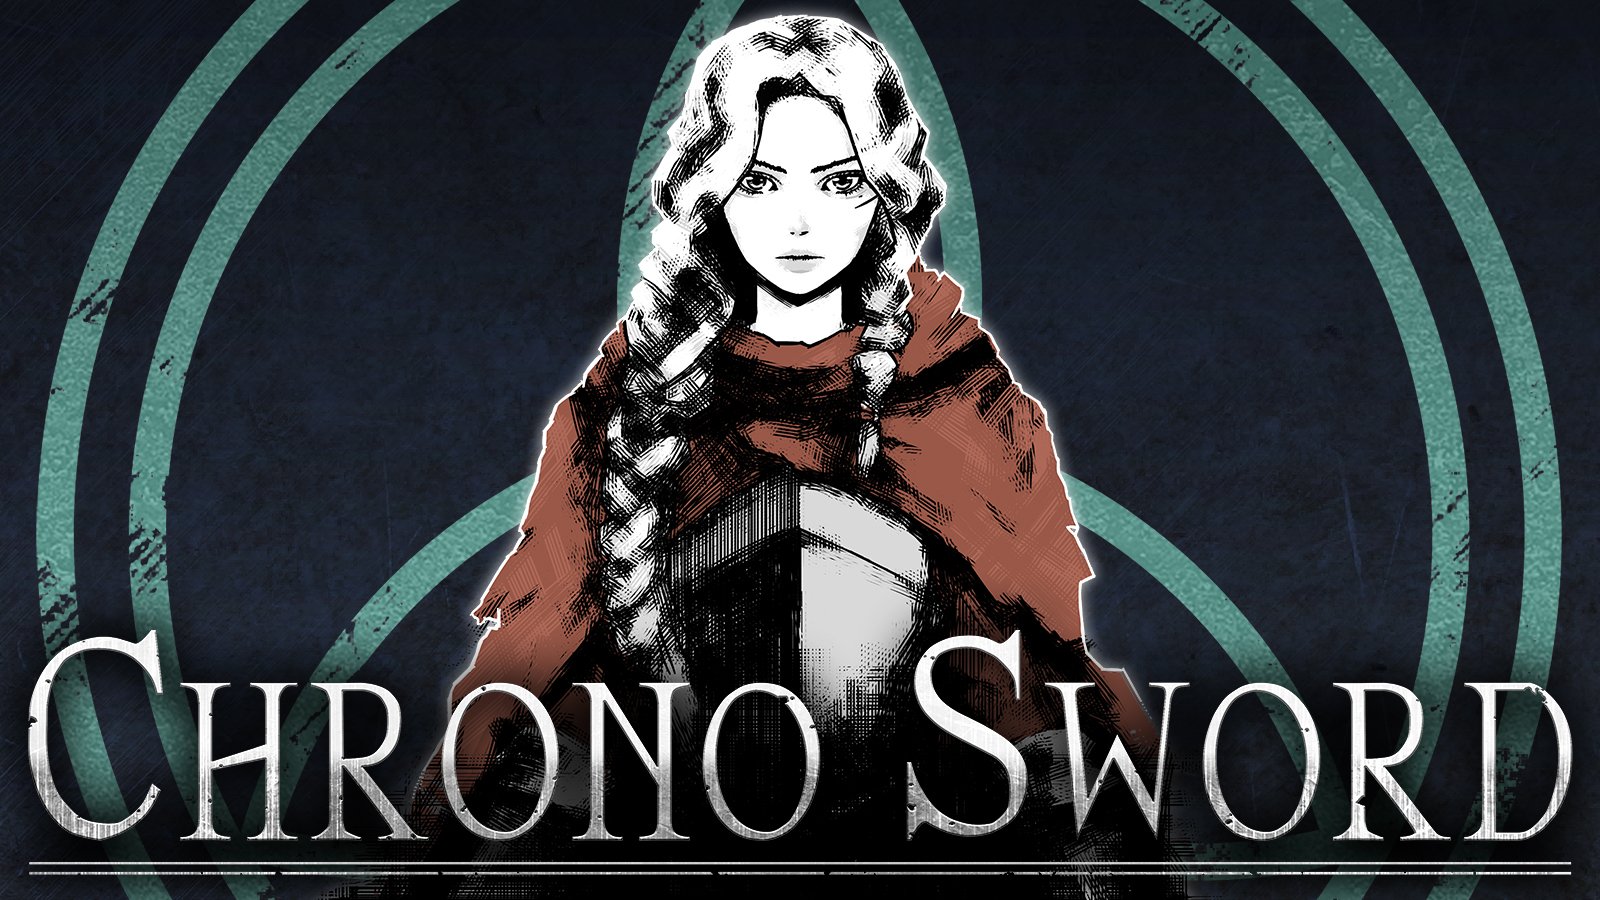 Soulslike action RPG Chrono Sword is published by CFK